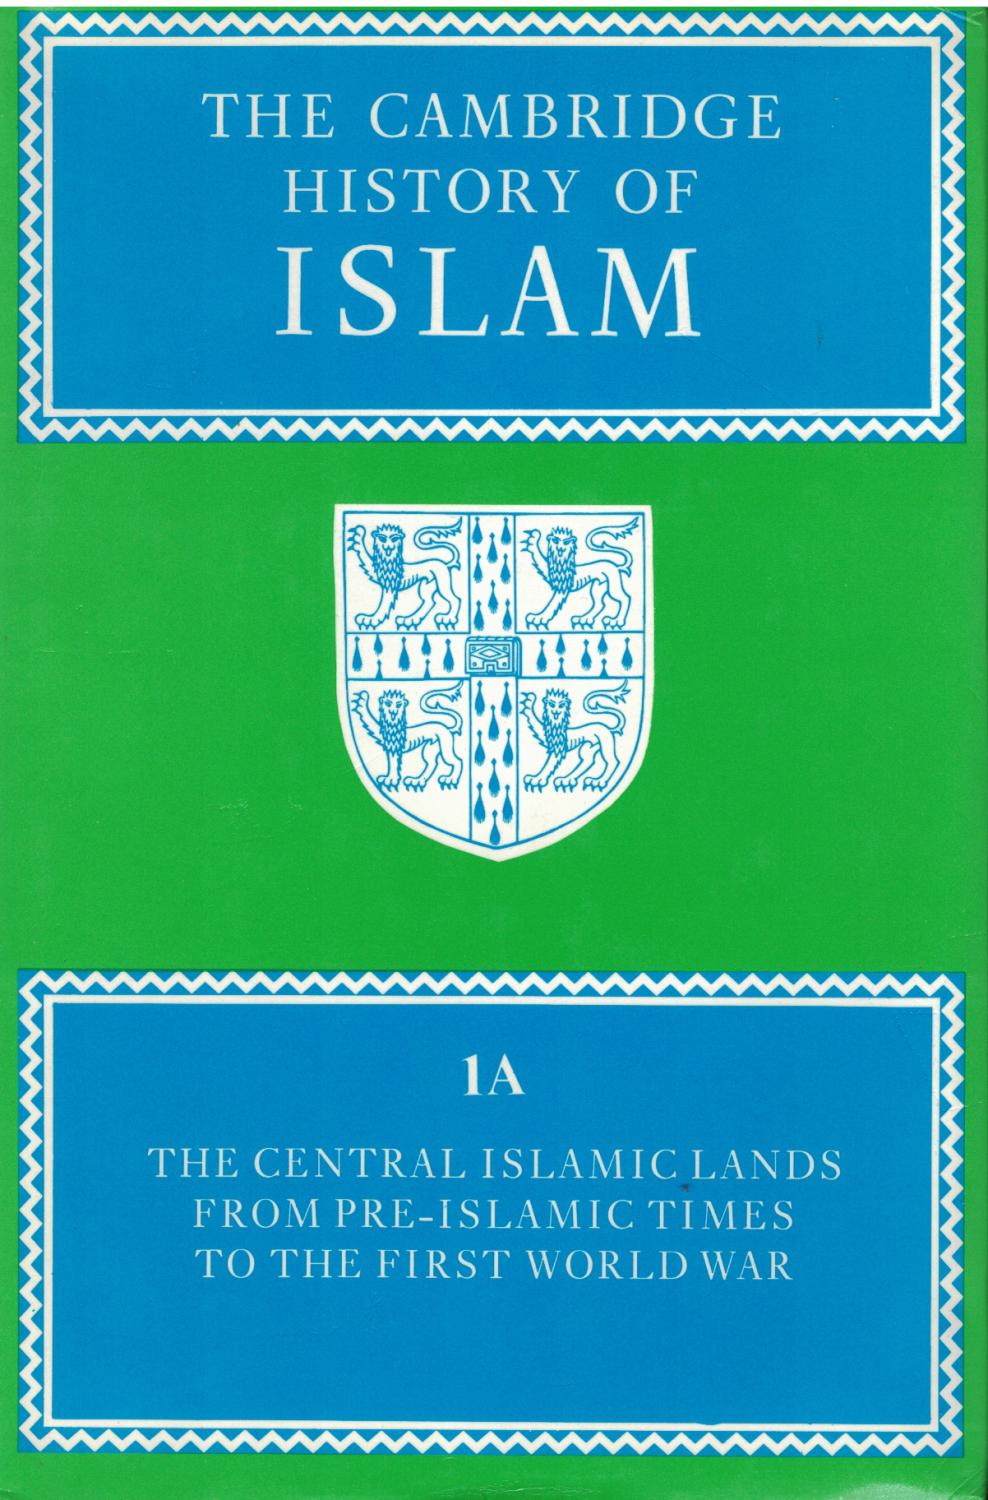 The Cambridge History of Islam, Volume 1A: The Central Islamic Lands from Pre-Islamic Times to the First World War - Holt, P. M. & Ann K. S. Lambton & Bernard Lewis